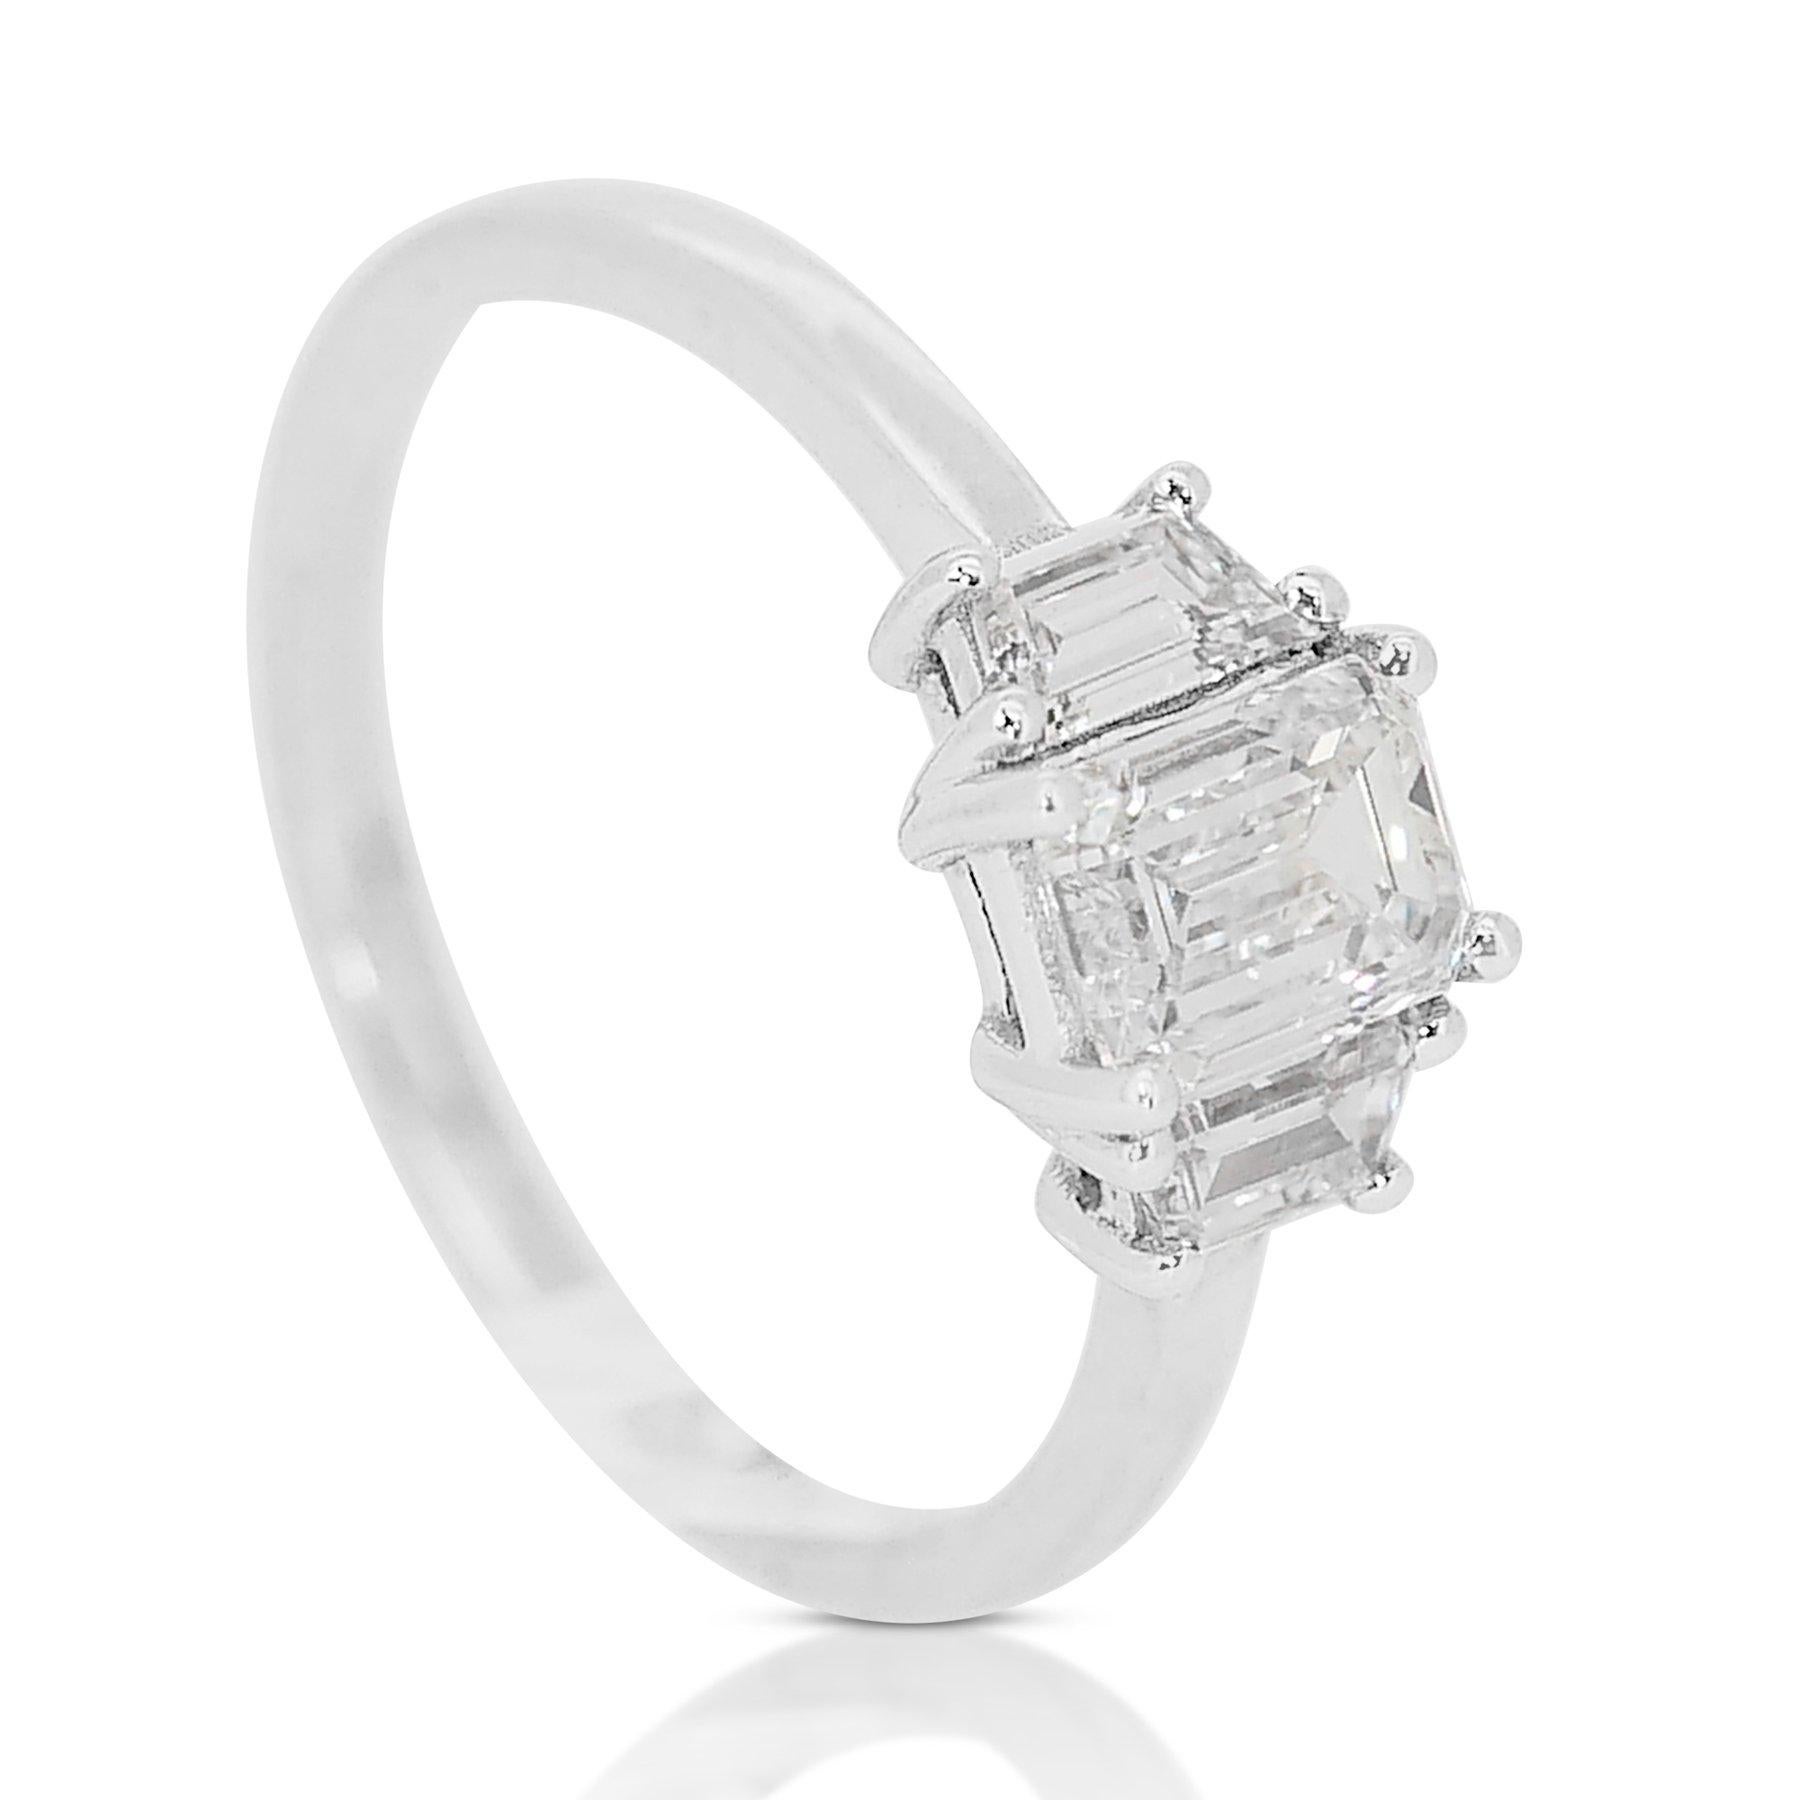 Emerald Cut Magnificent 1.35ct Diamond 3-Stone Ring in 18k White Gold - GIA Certified For Sale